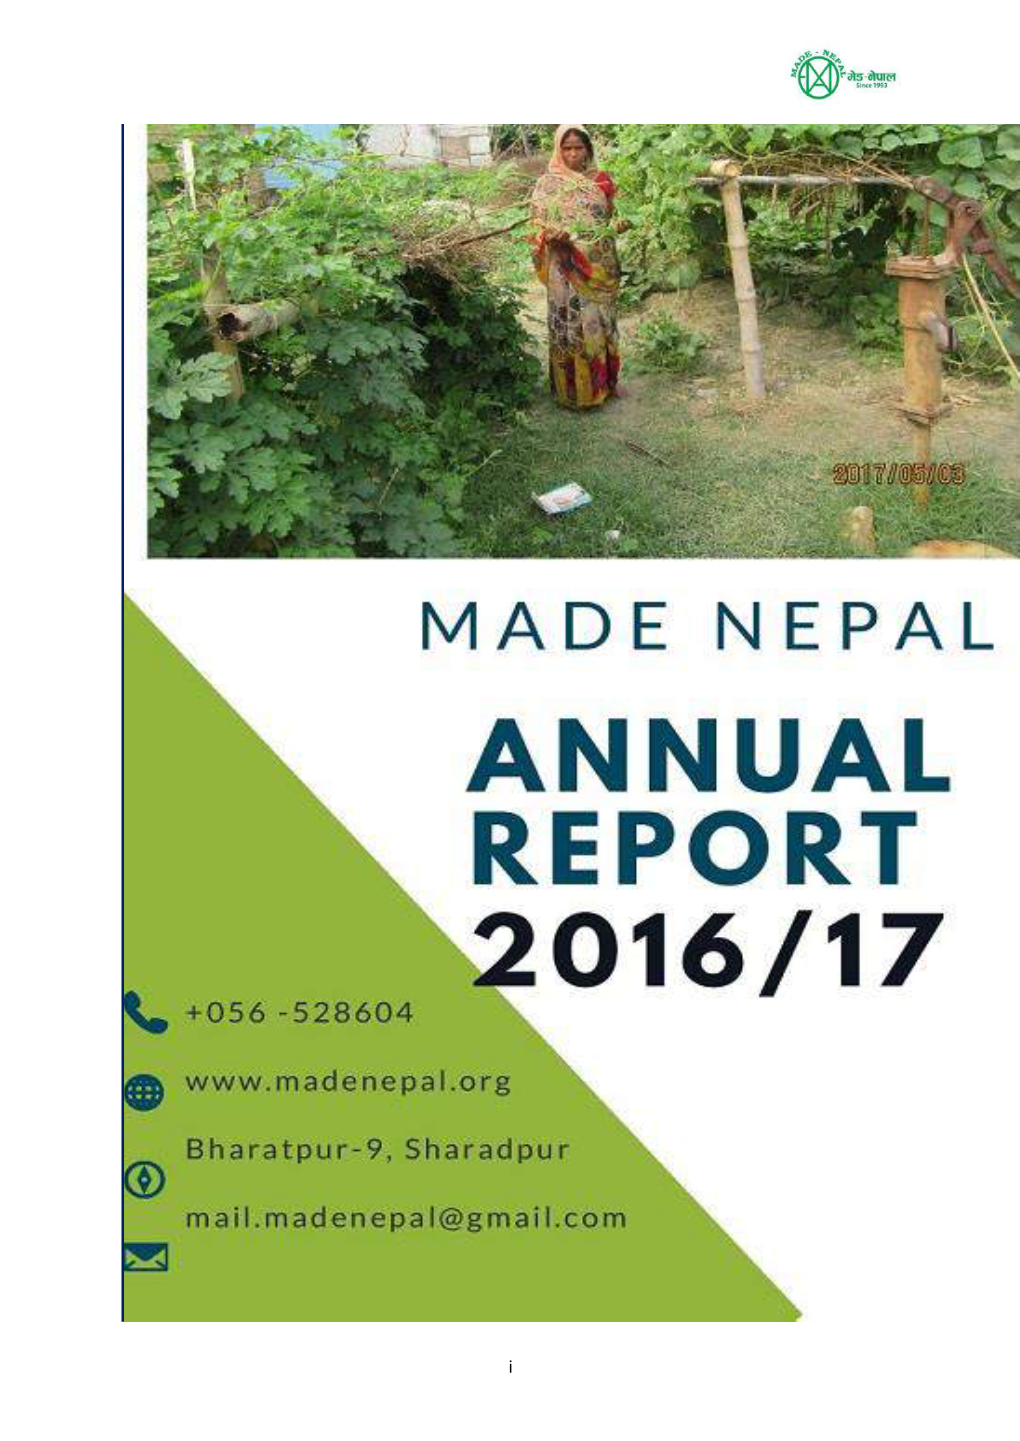 Annual Report 2016/17 Has Been Commenced in This Shape After Restless Engagement and Support from Different Personnel